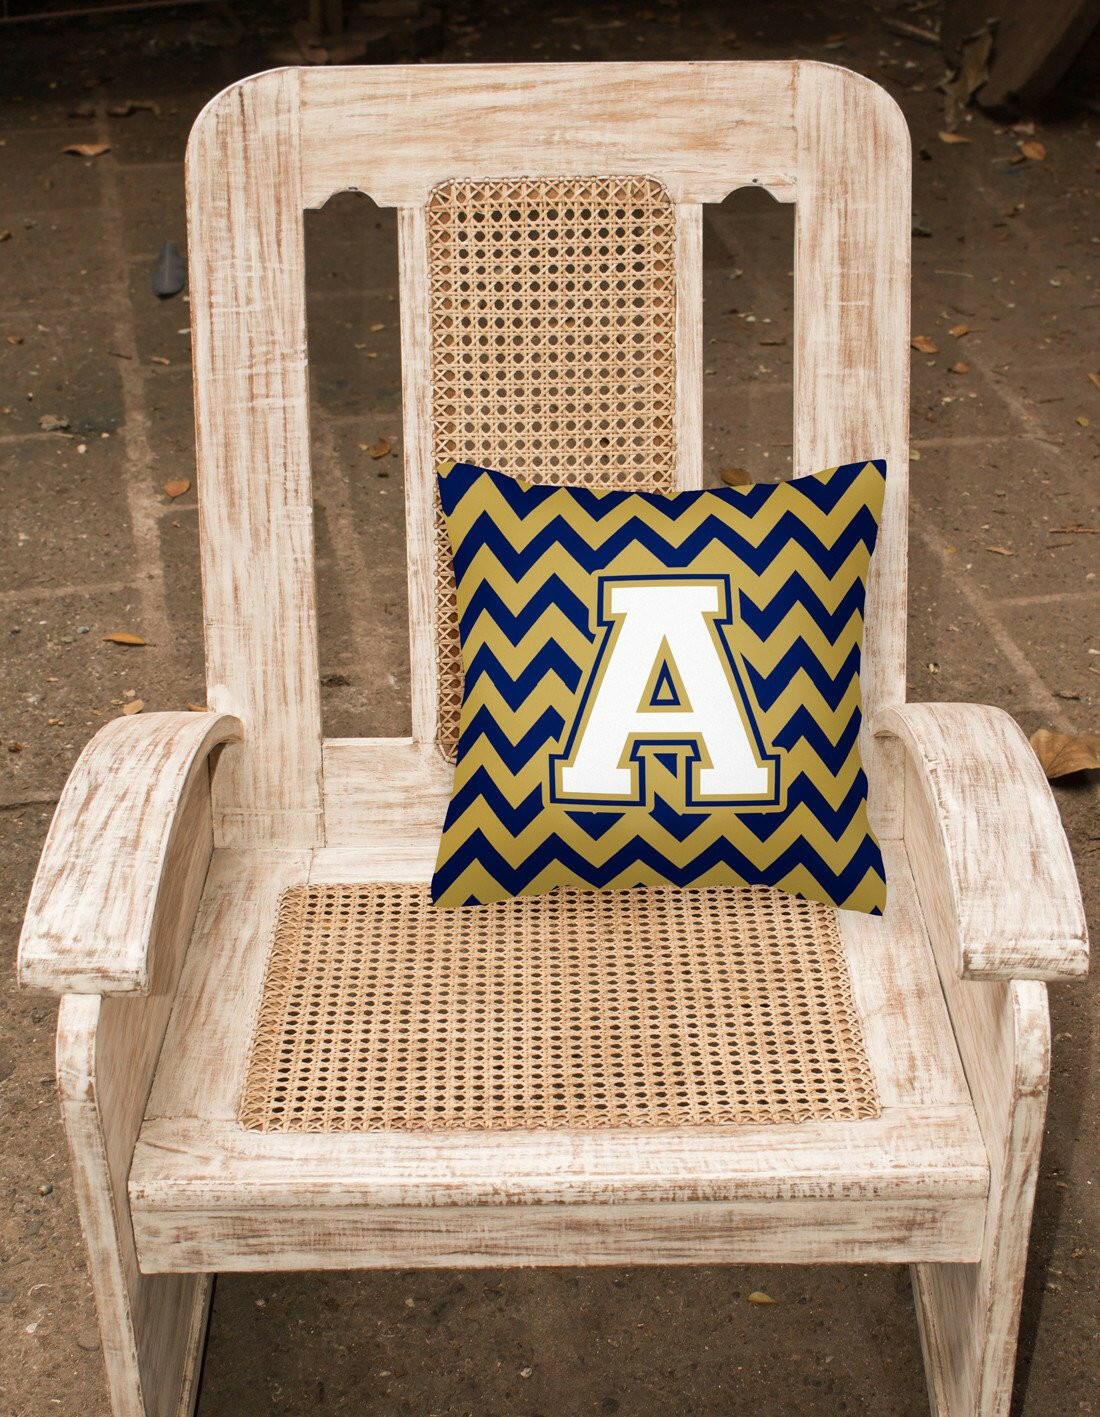 Letter A Chevron Navy Blue and Gold Fabric Decorative Pillow CJ1057-APW1414 by Caroline's Treasures